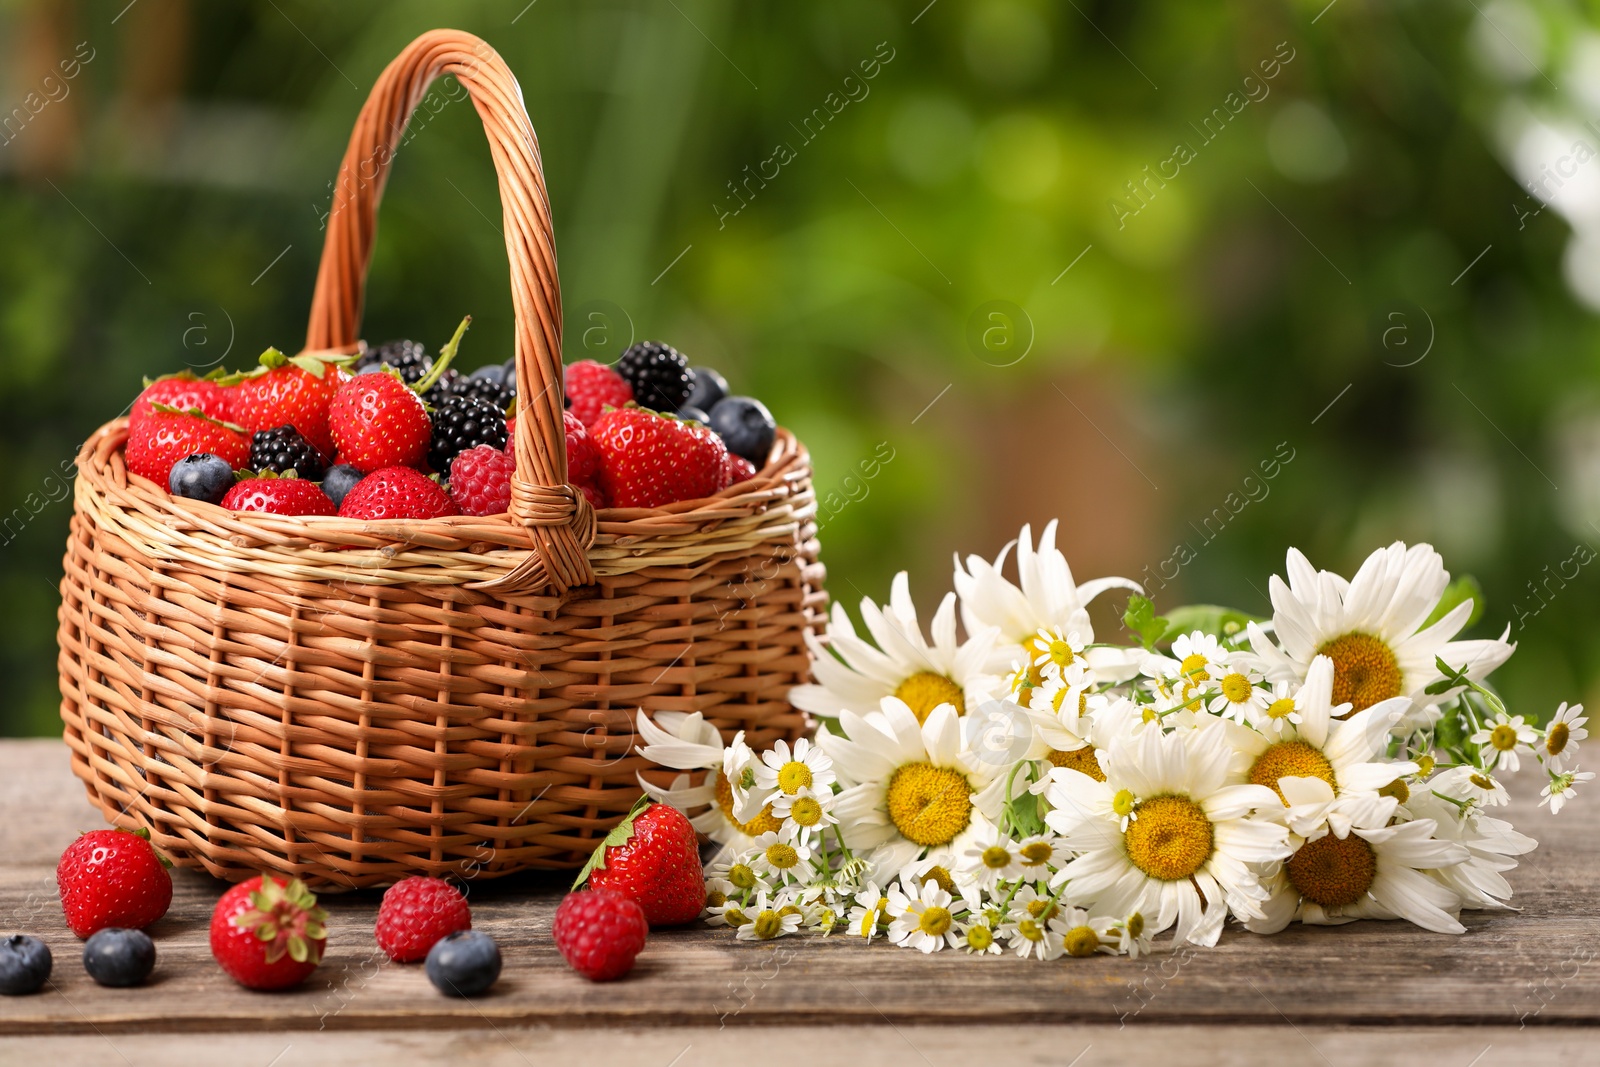 Photo of Wicker basket with different fresh ripe berries and beautiful chamomile flowers on wooden table outdoors